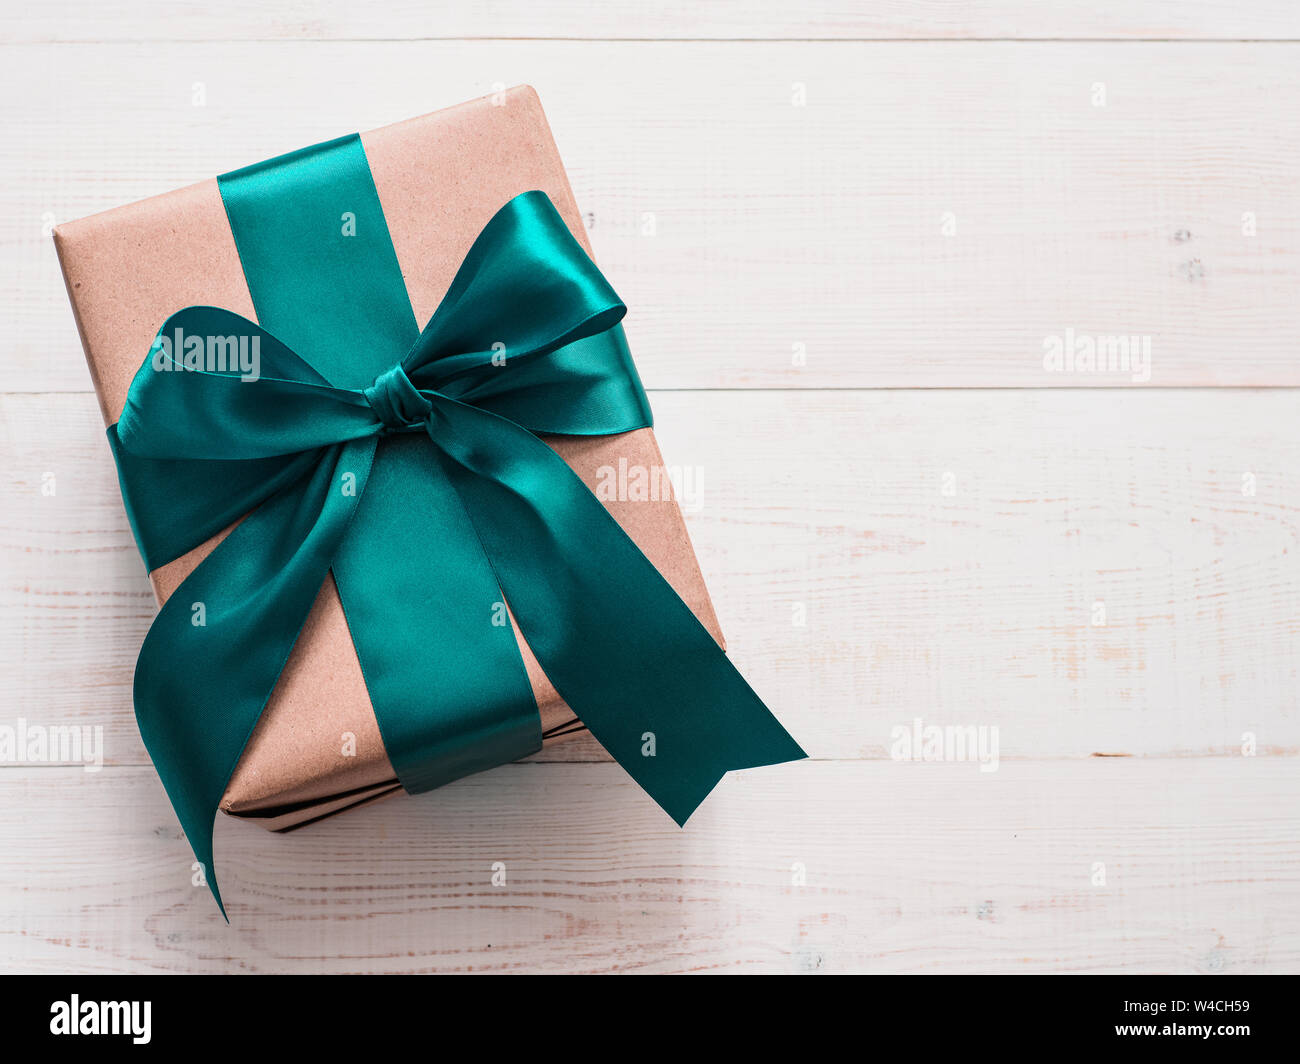 Gift box in craft wrapping paper and green satin ribbon on white